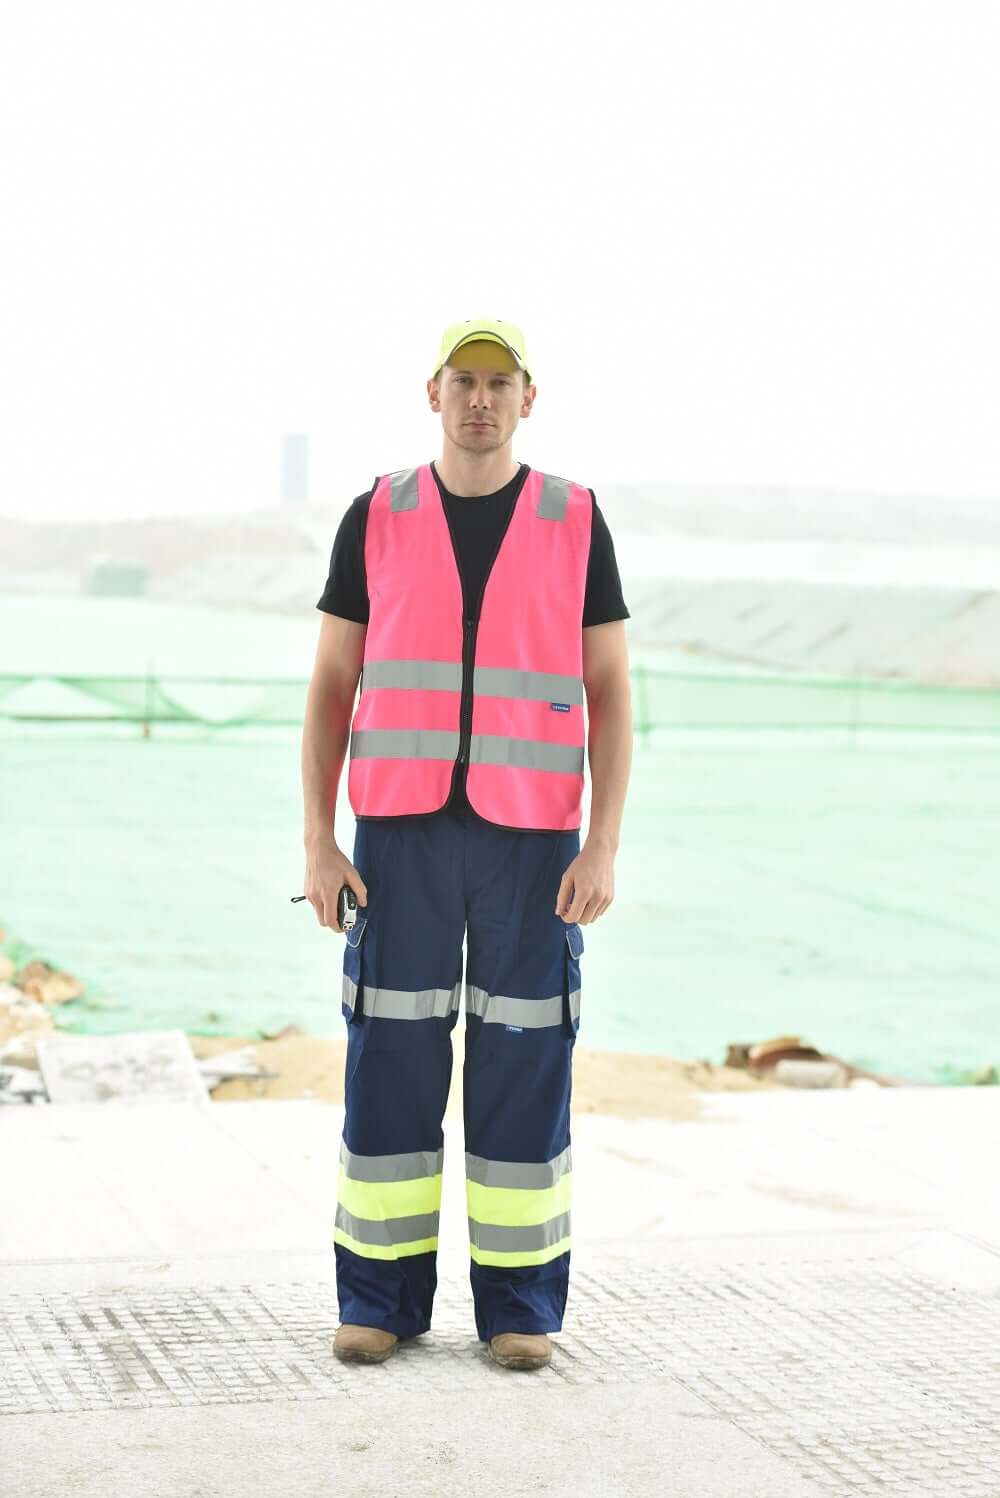 AYKRMHIVIS High Visibility Safety Vest With Pockets And Zipper